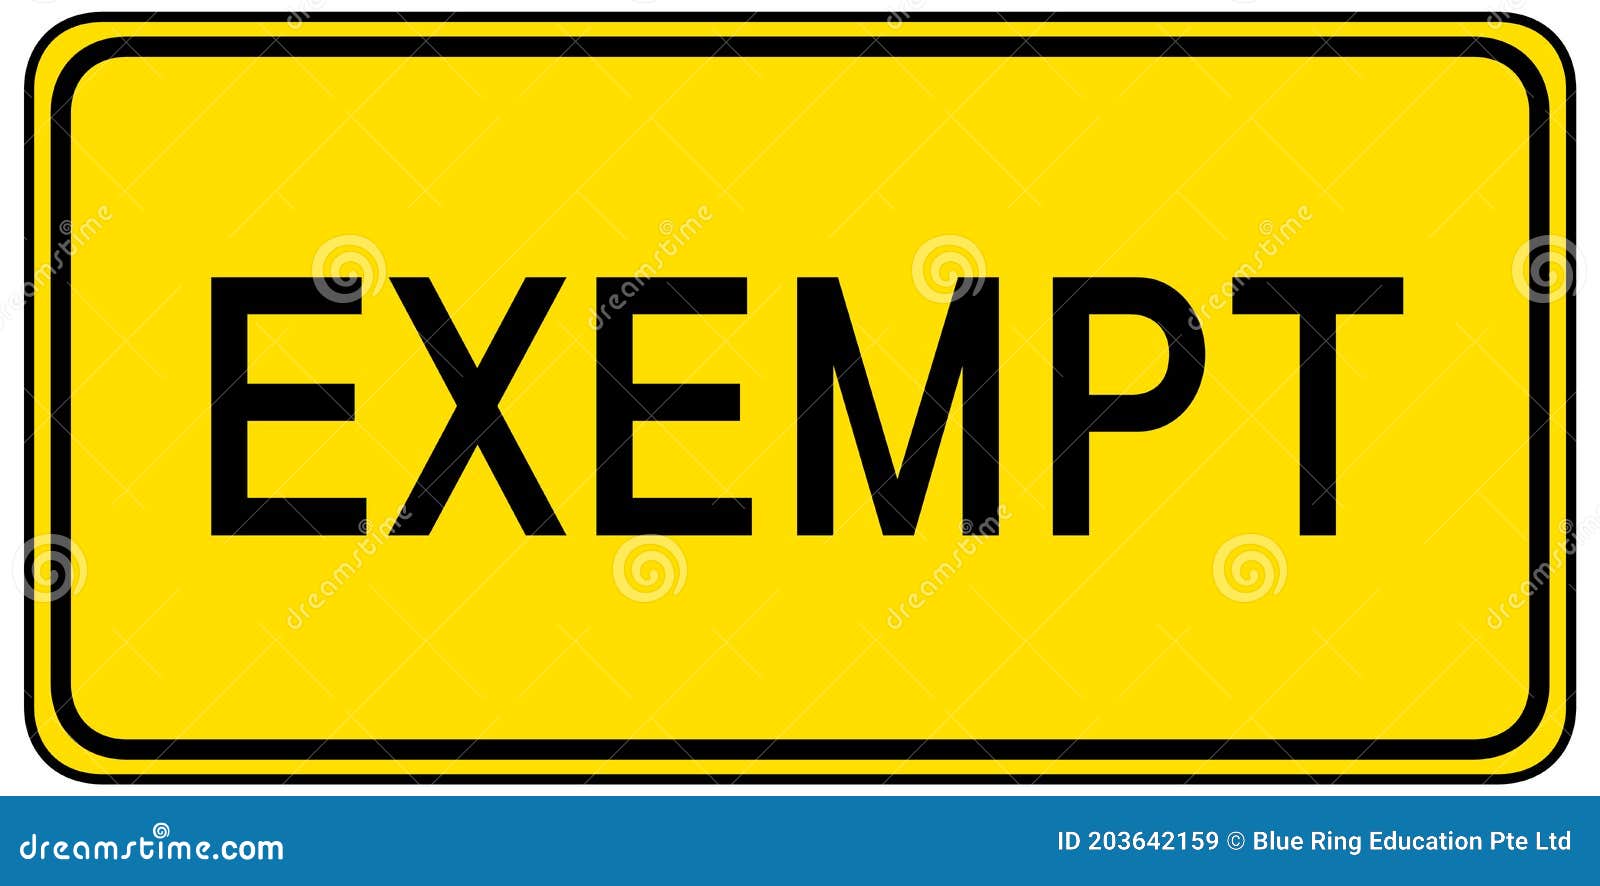 exempt sign  on white background